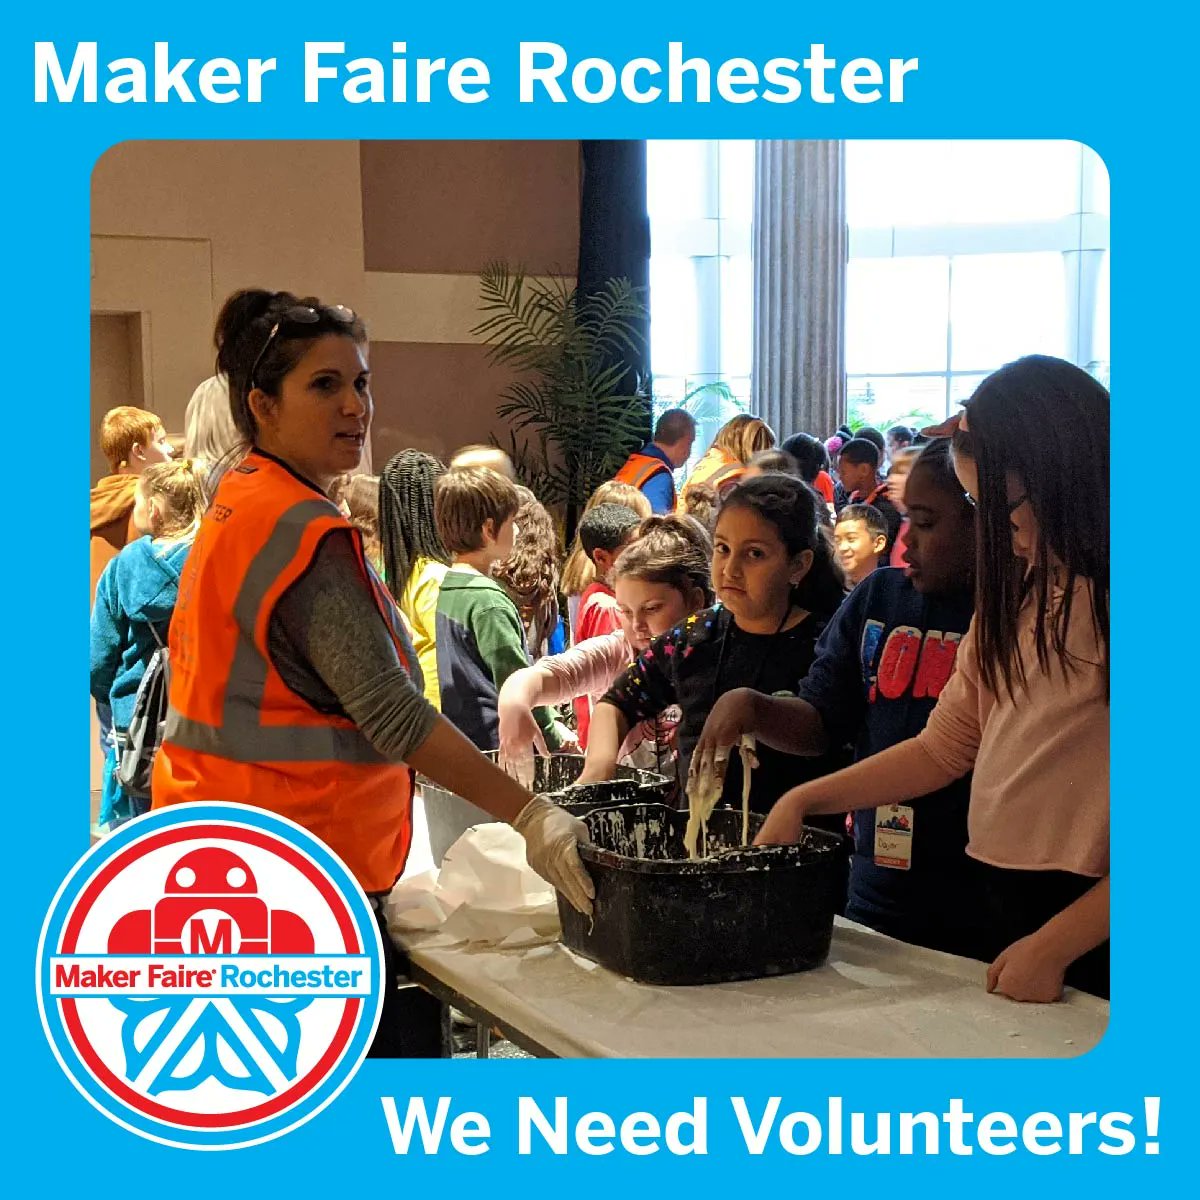 We're still on the lookout for volunteers to help out with Maker Faire Rochester 2022! You'll get free access to the event once your work is done! rochester.makerfaire.com/.../call-for-v…